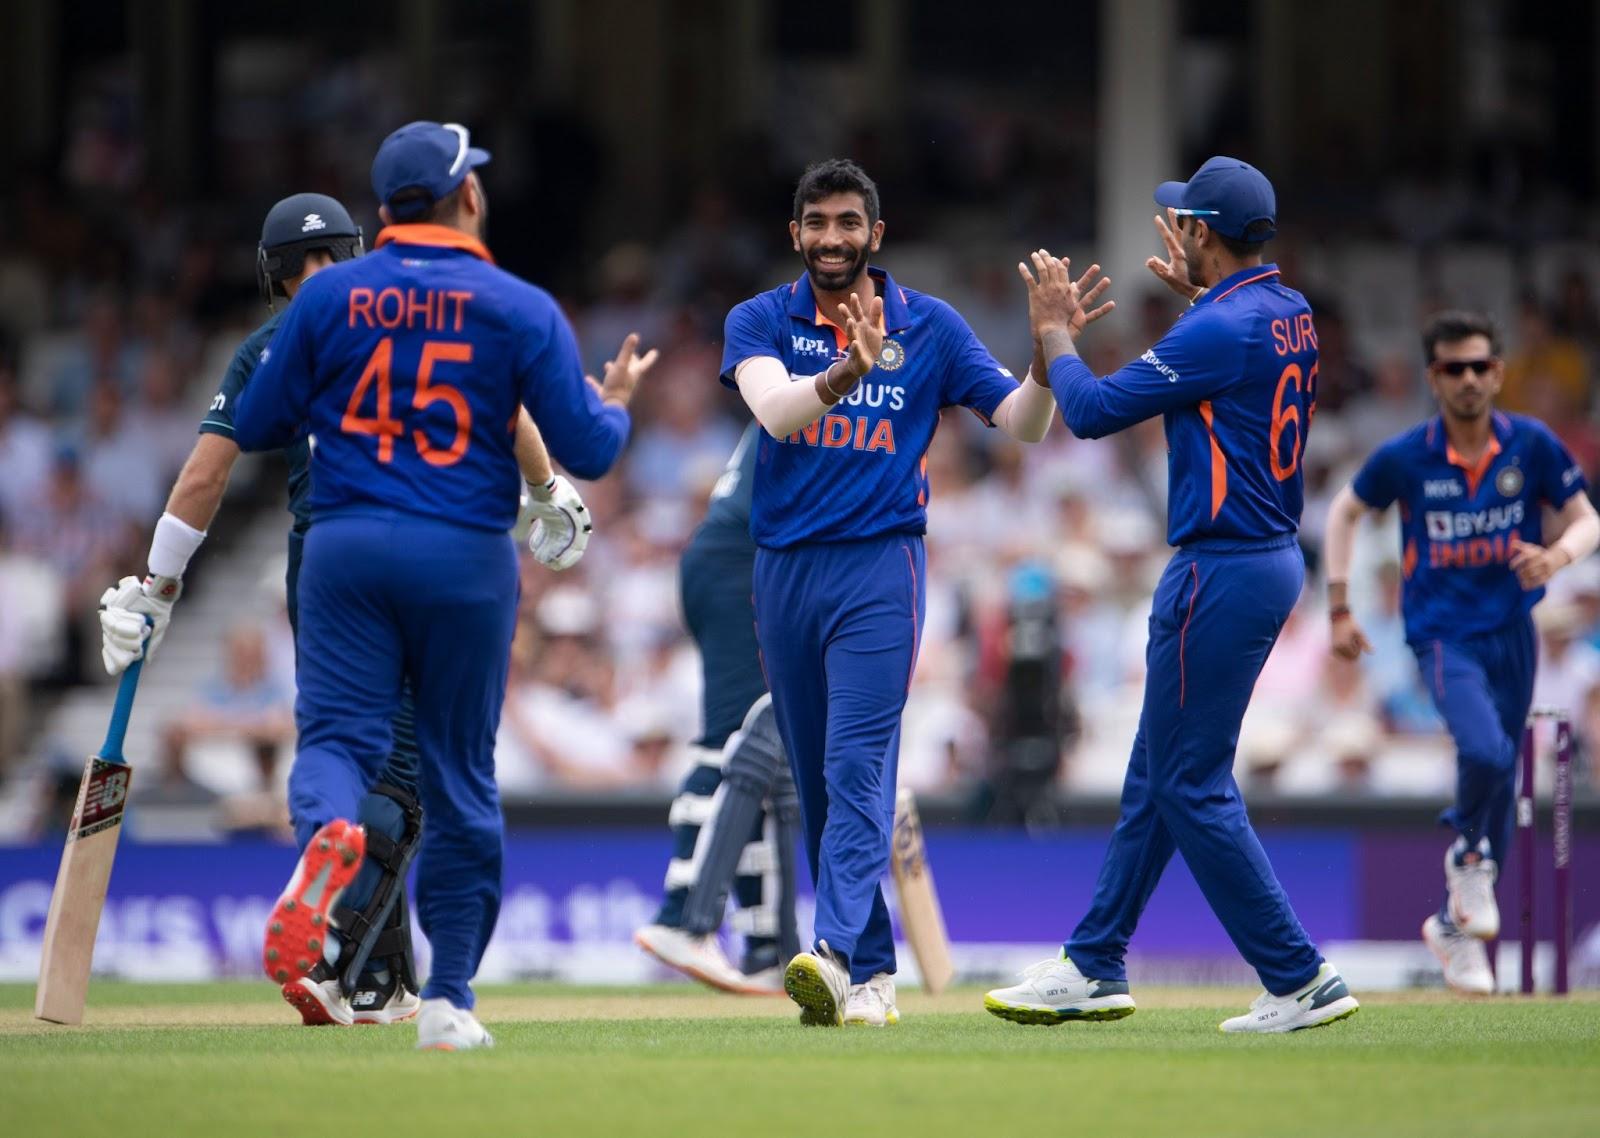 Jasprit Bumrah wreaked havoc with the new ball against England